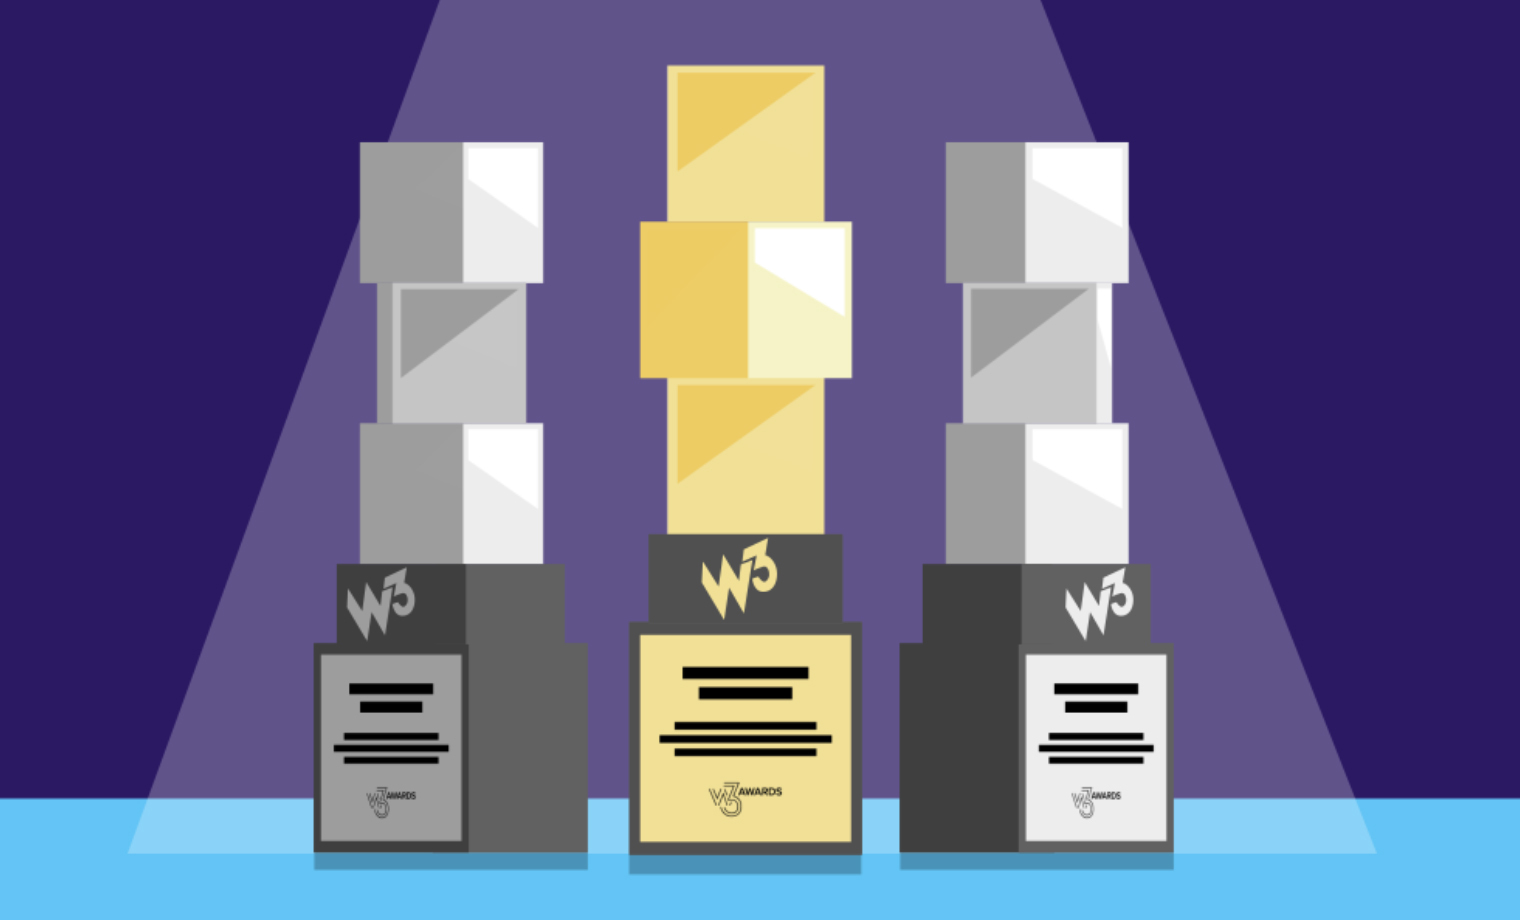 Blue Flame Thinking wins Gold and two Silvers at the 2022 AIVA w3 Awards for its client websites